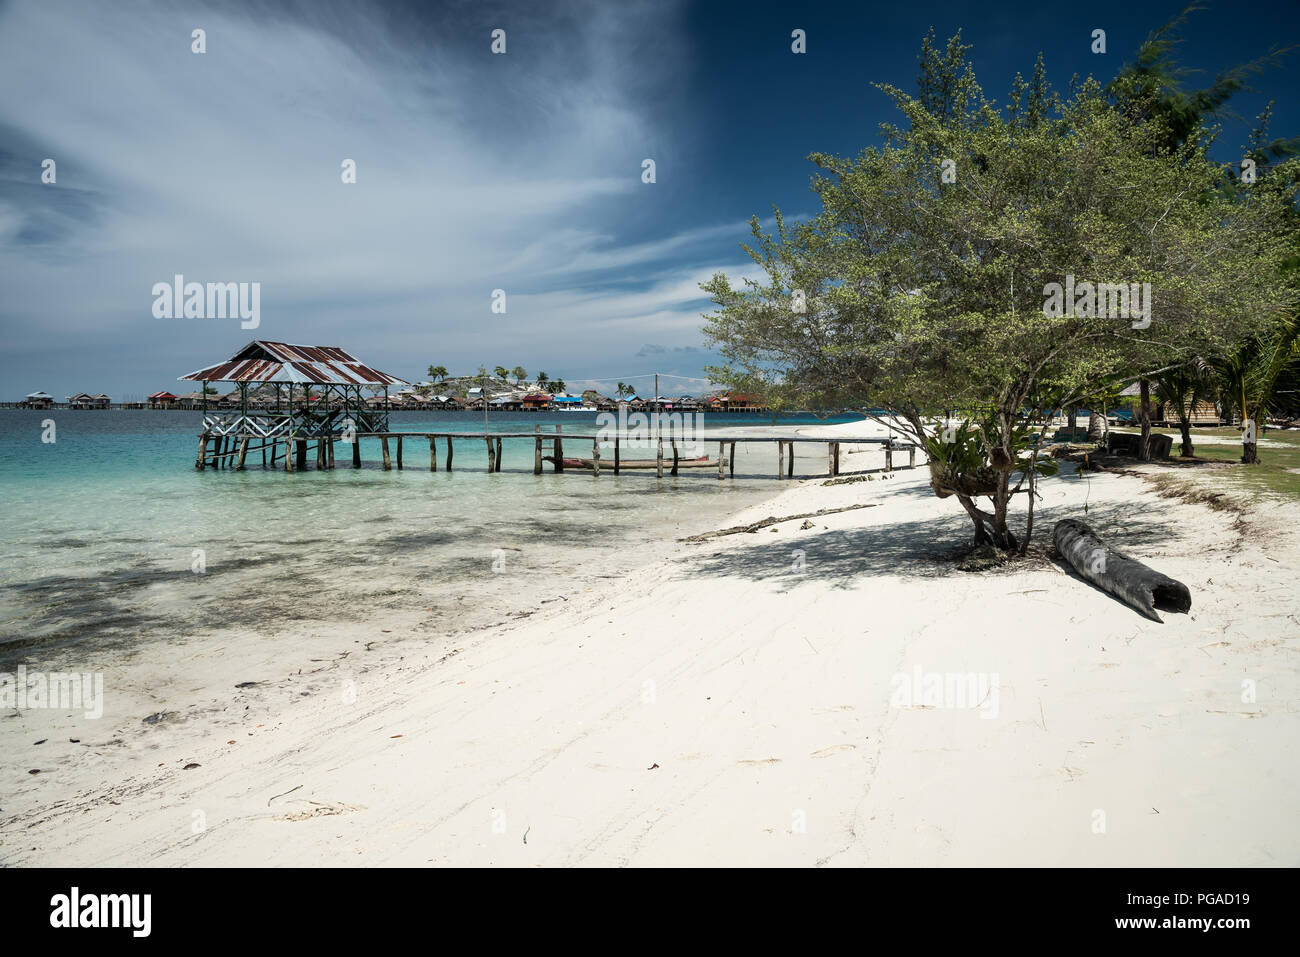 Tropical sand beach resort on remote Malenge island, part of Togean archipelago with traditional boats, Lestari, Indonesia Stock Photo